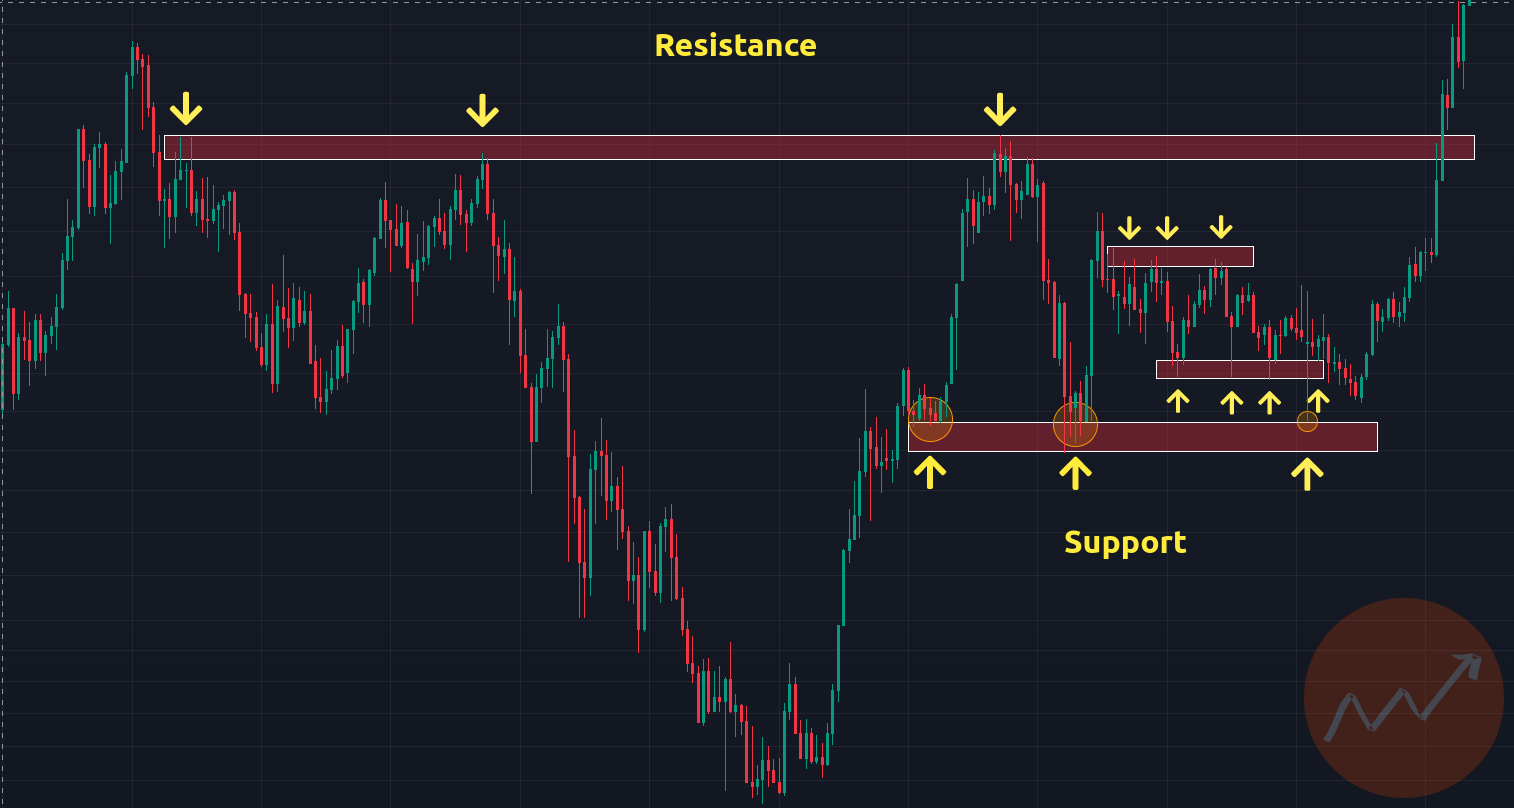 How to find support and resistance levels